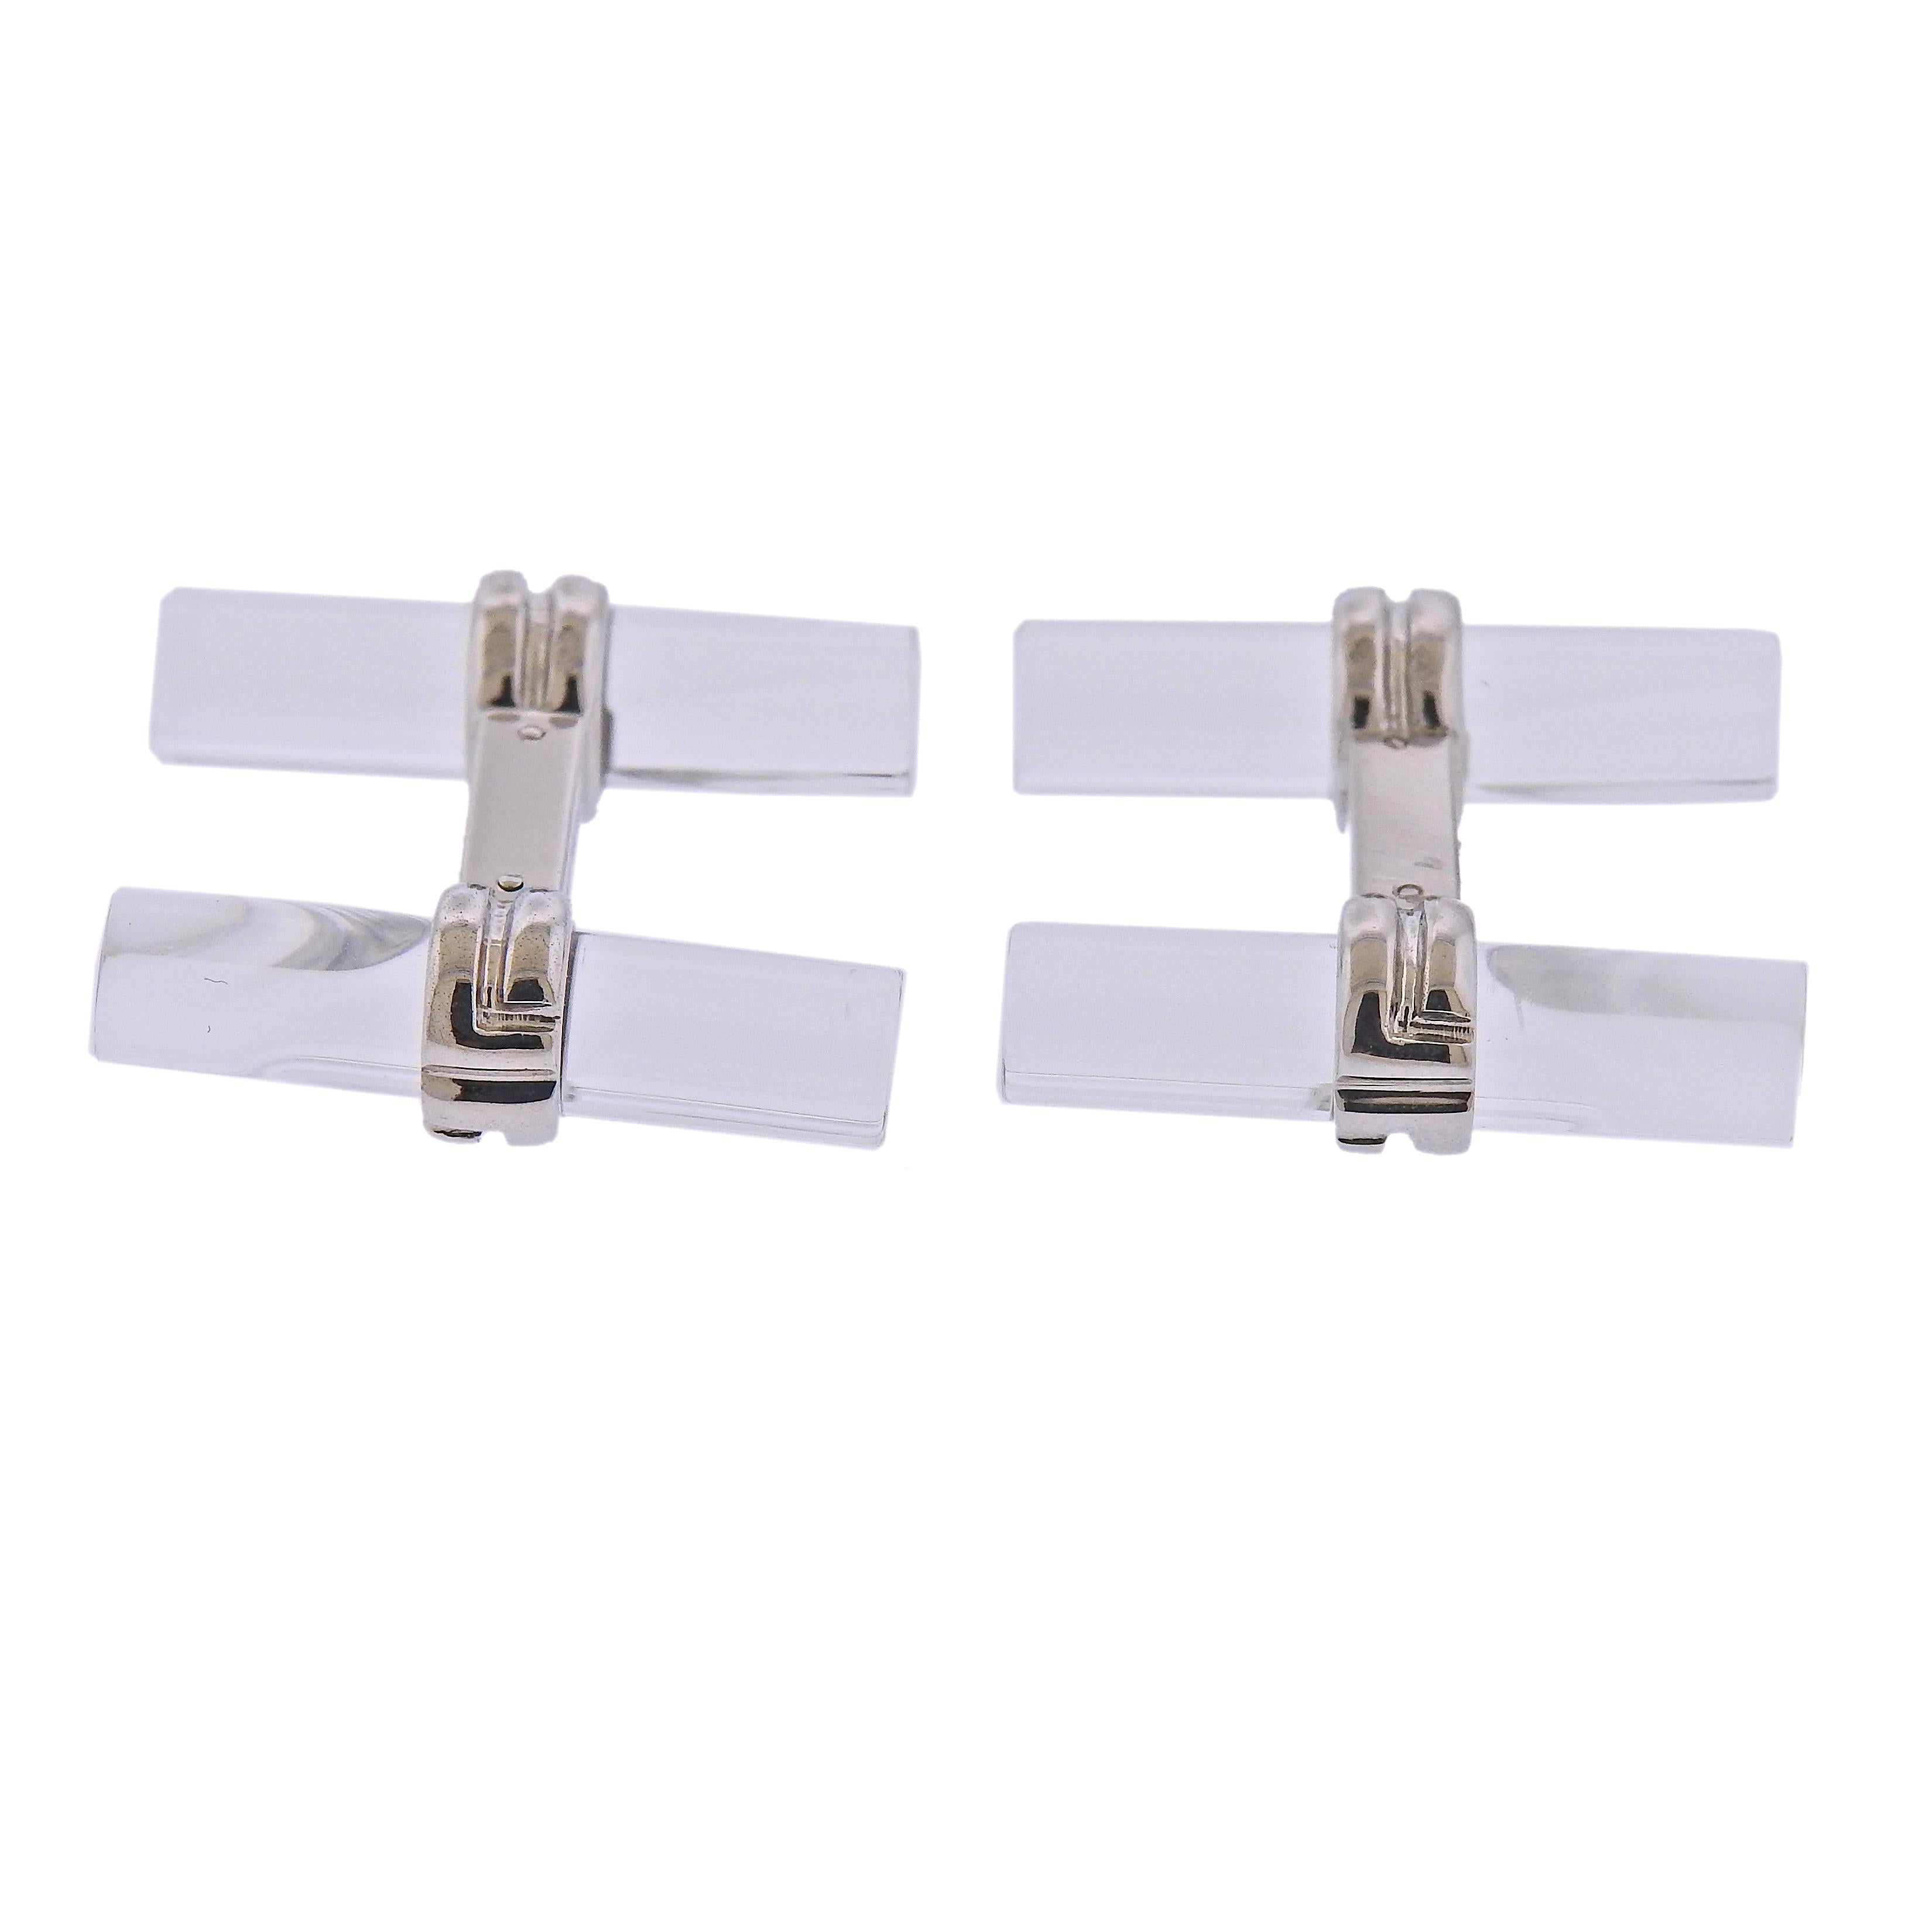 18k white gold pair of bar cufflinks by Boucheron Paris, with rock crystal.  Each bar is 22mm x 7mm.   Weight - 10.2 grams. Marked: Boucheron, Or750, E45072.